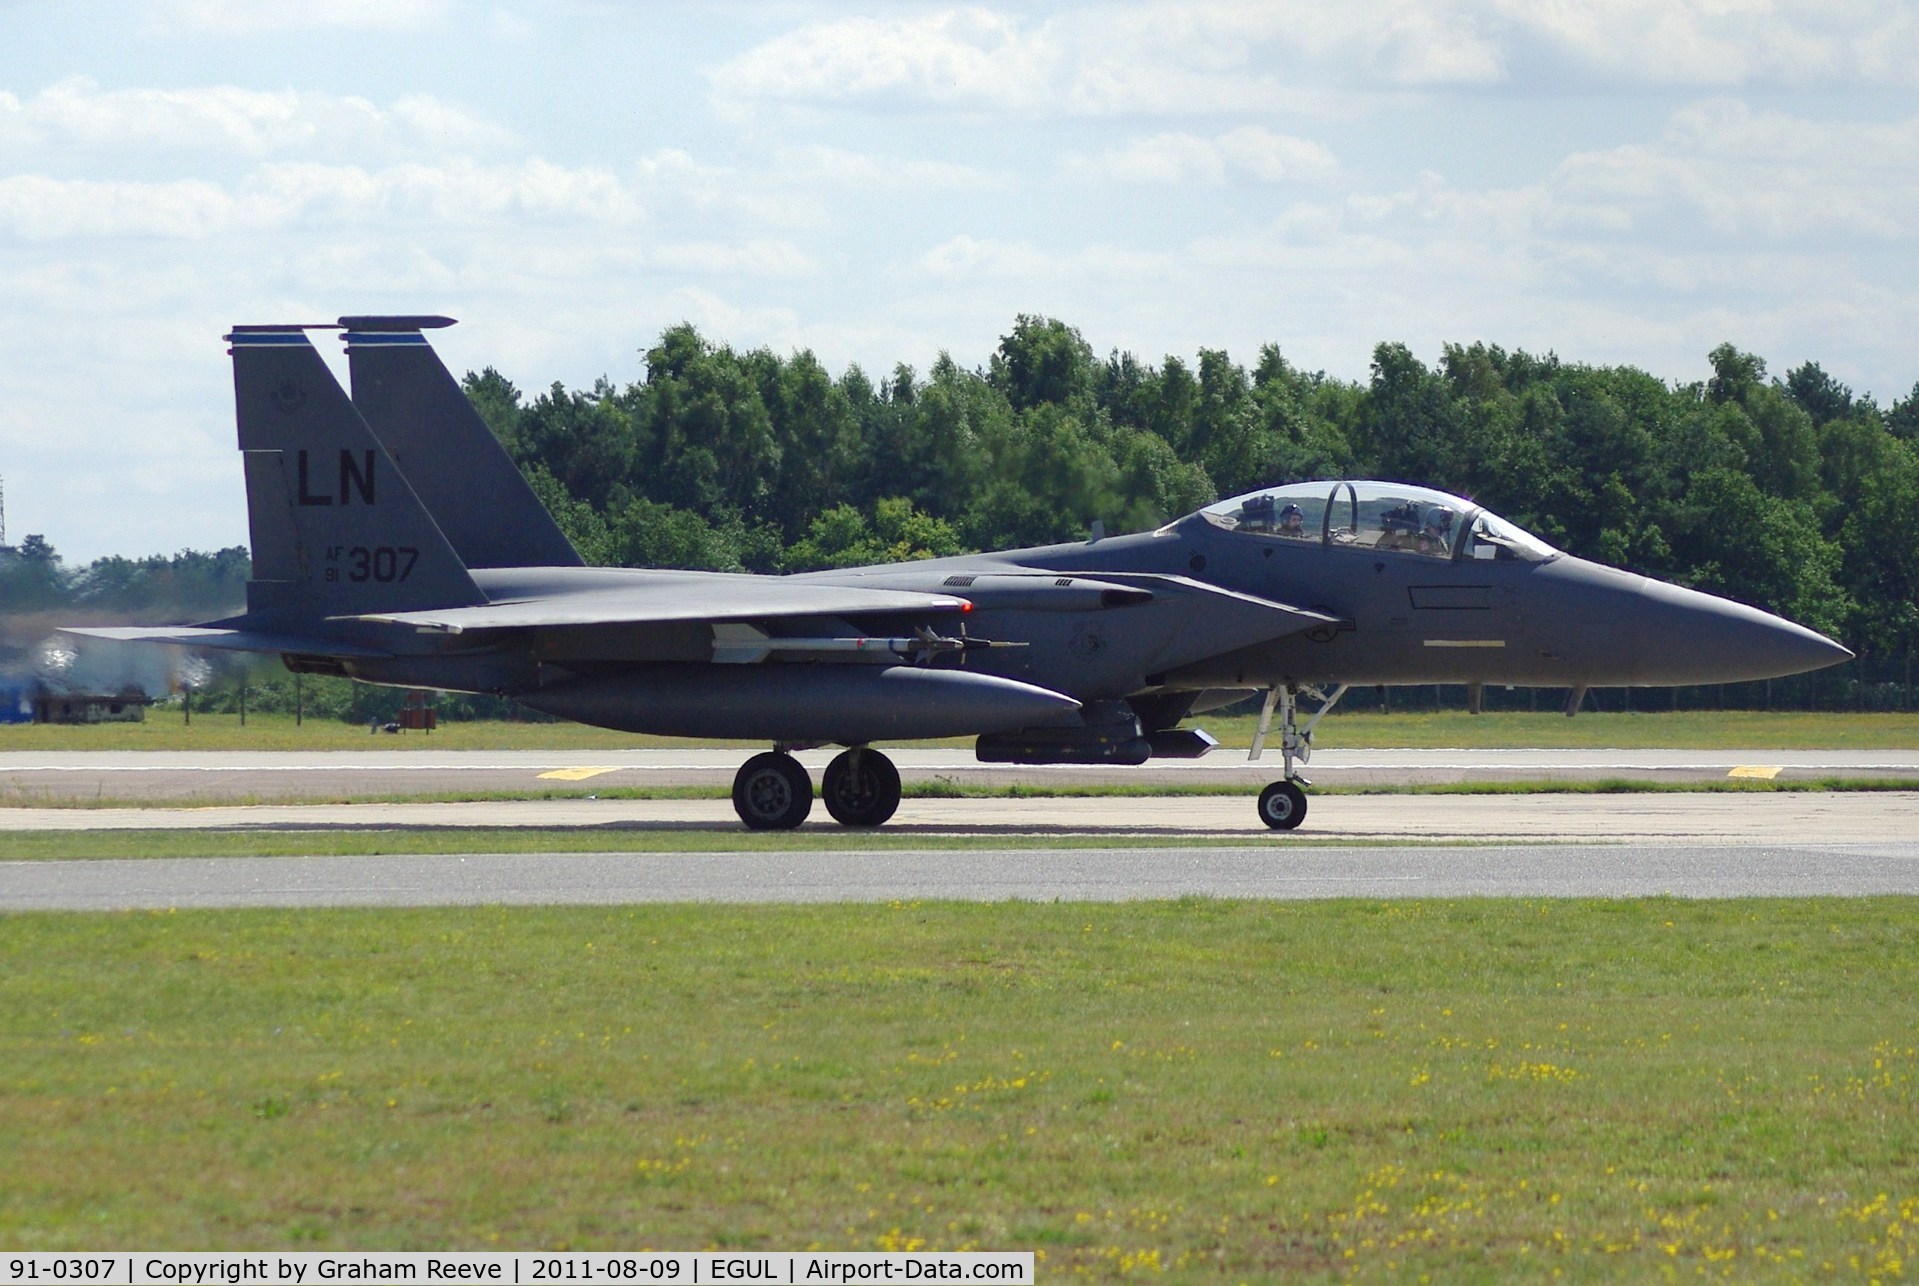 91-0307, 1991 McDonnell Douglas F-15E Strike Eagle C/N 1214, About to take off.